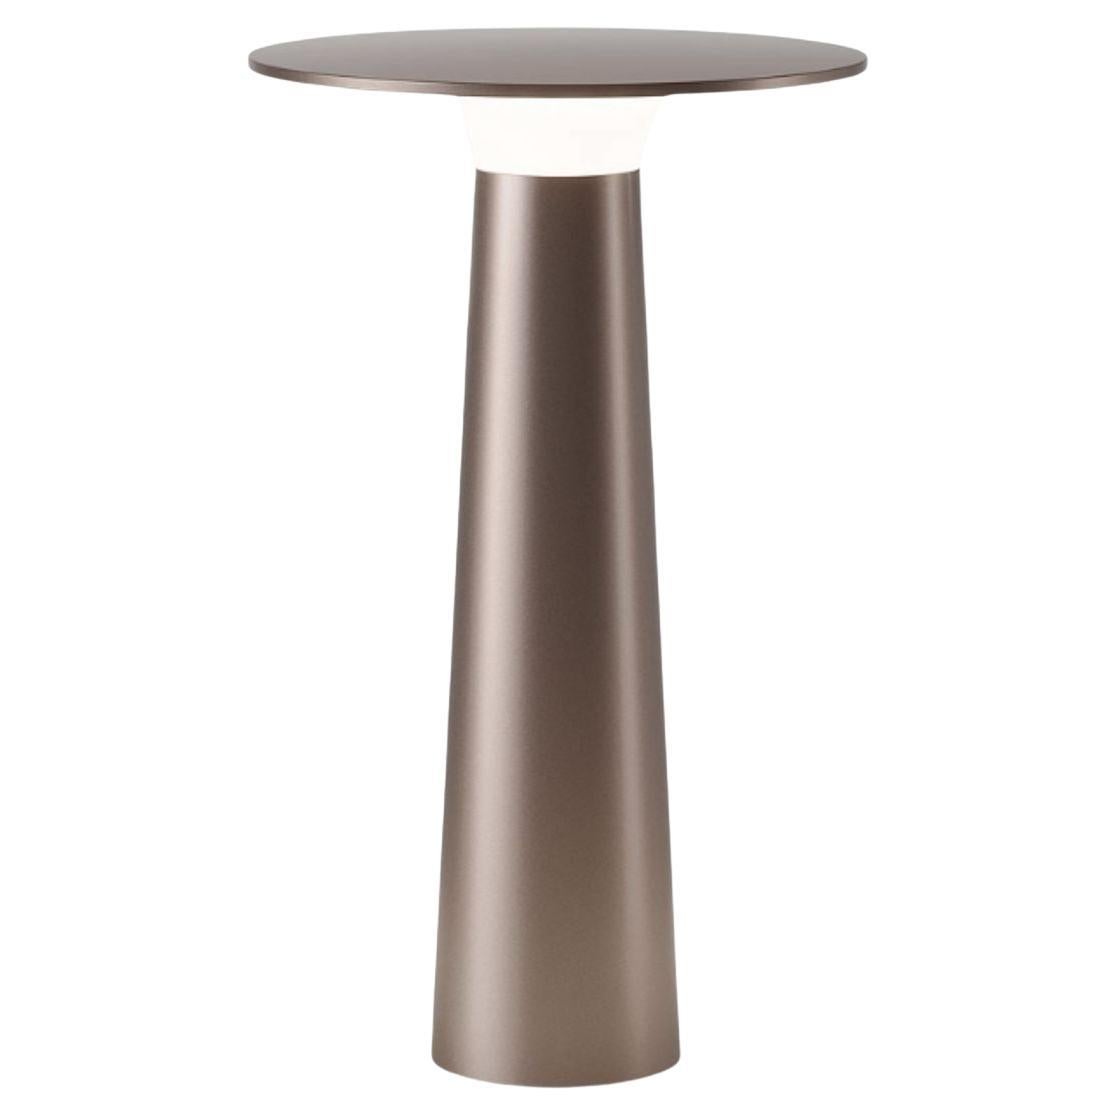 Contemporary Klaus Nolting 'Lix' Portable Outdoor Aluminum Table Lamp in Ruby for Ip44de For Sale